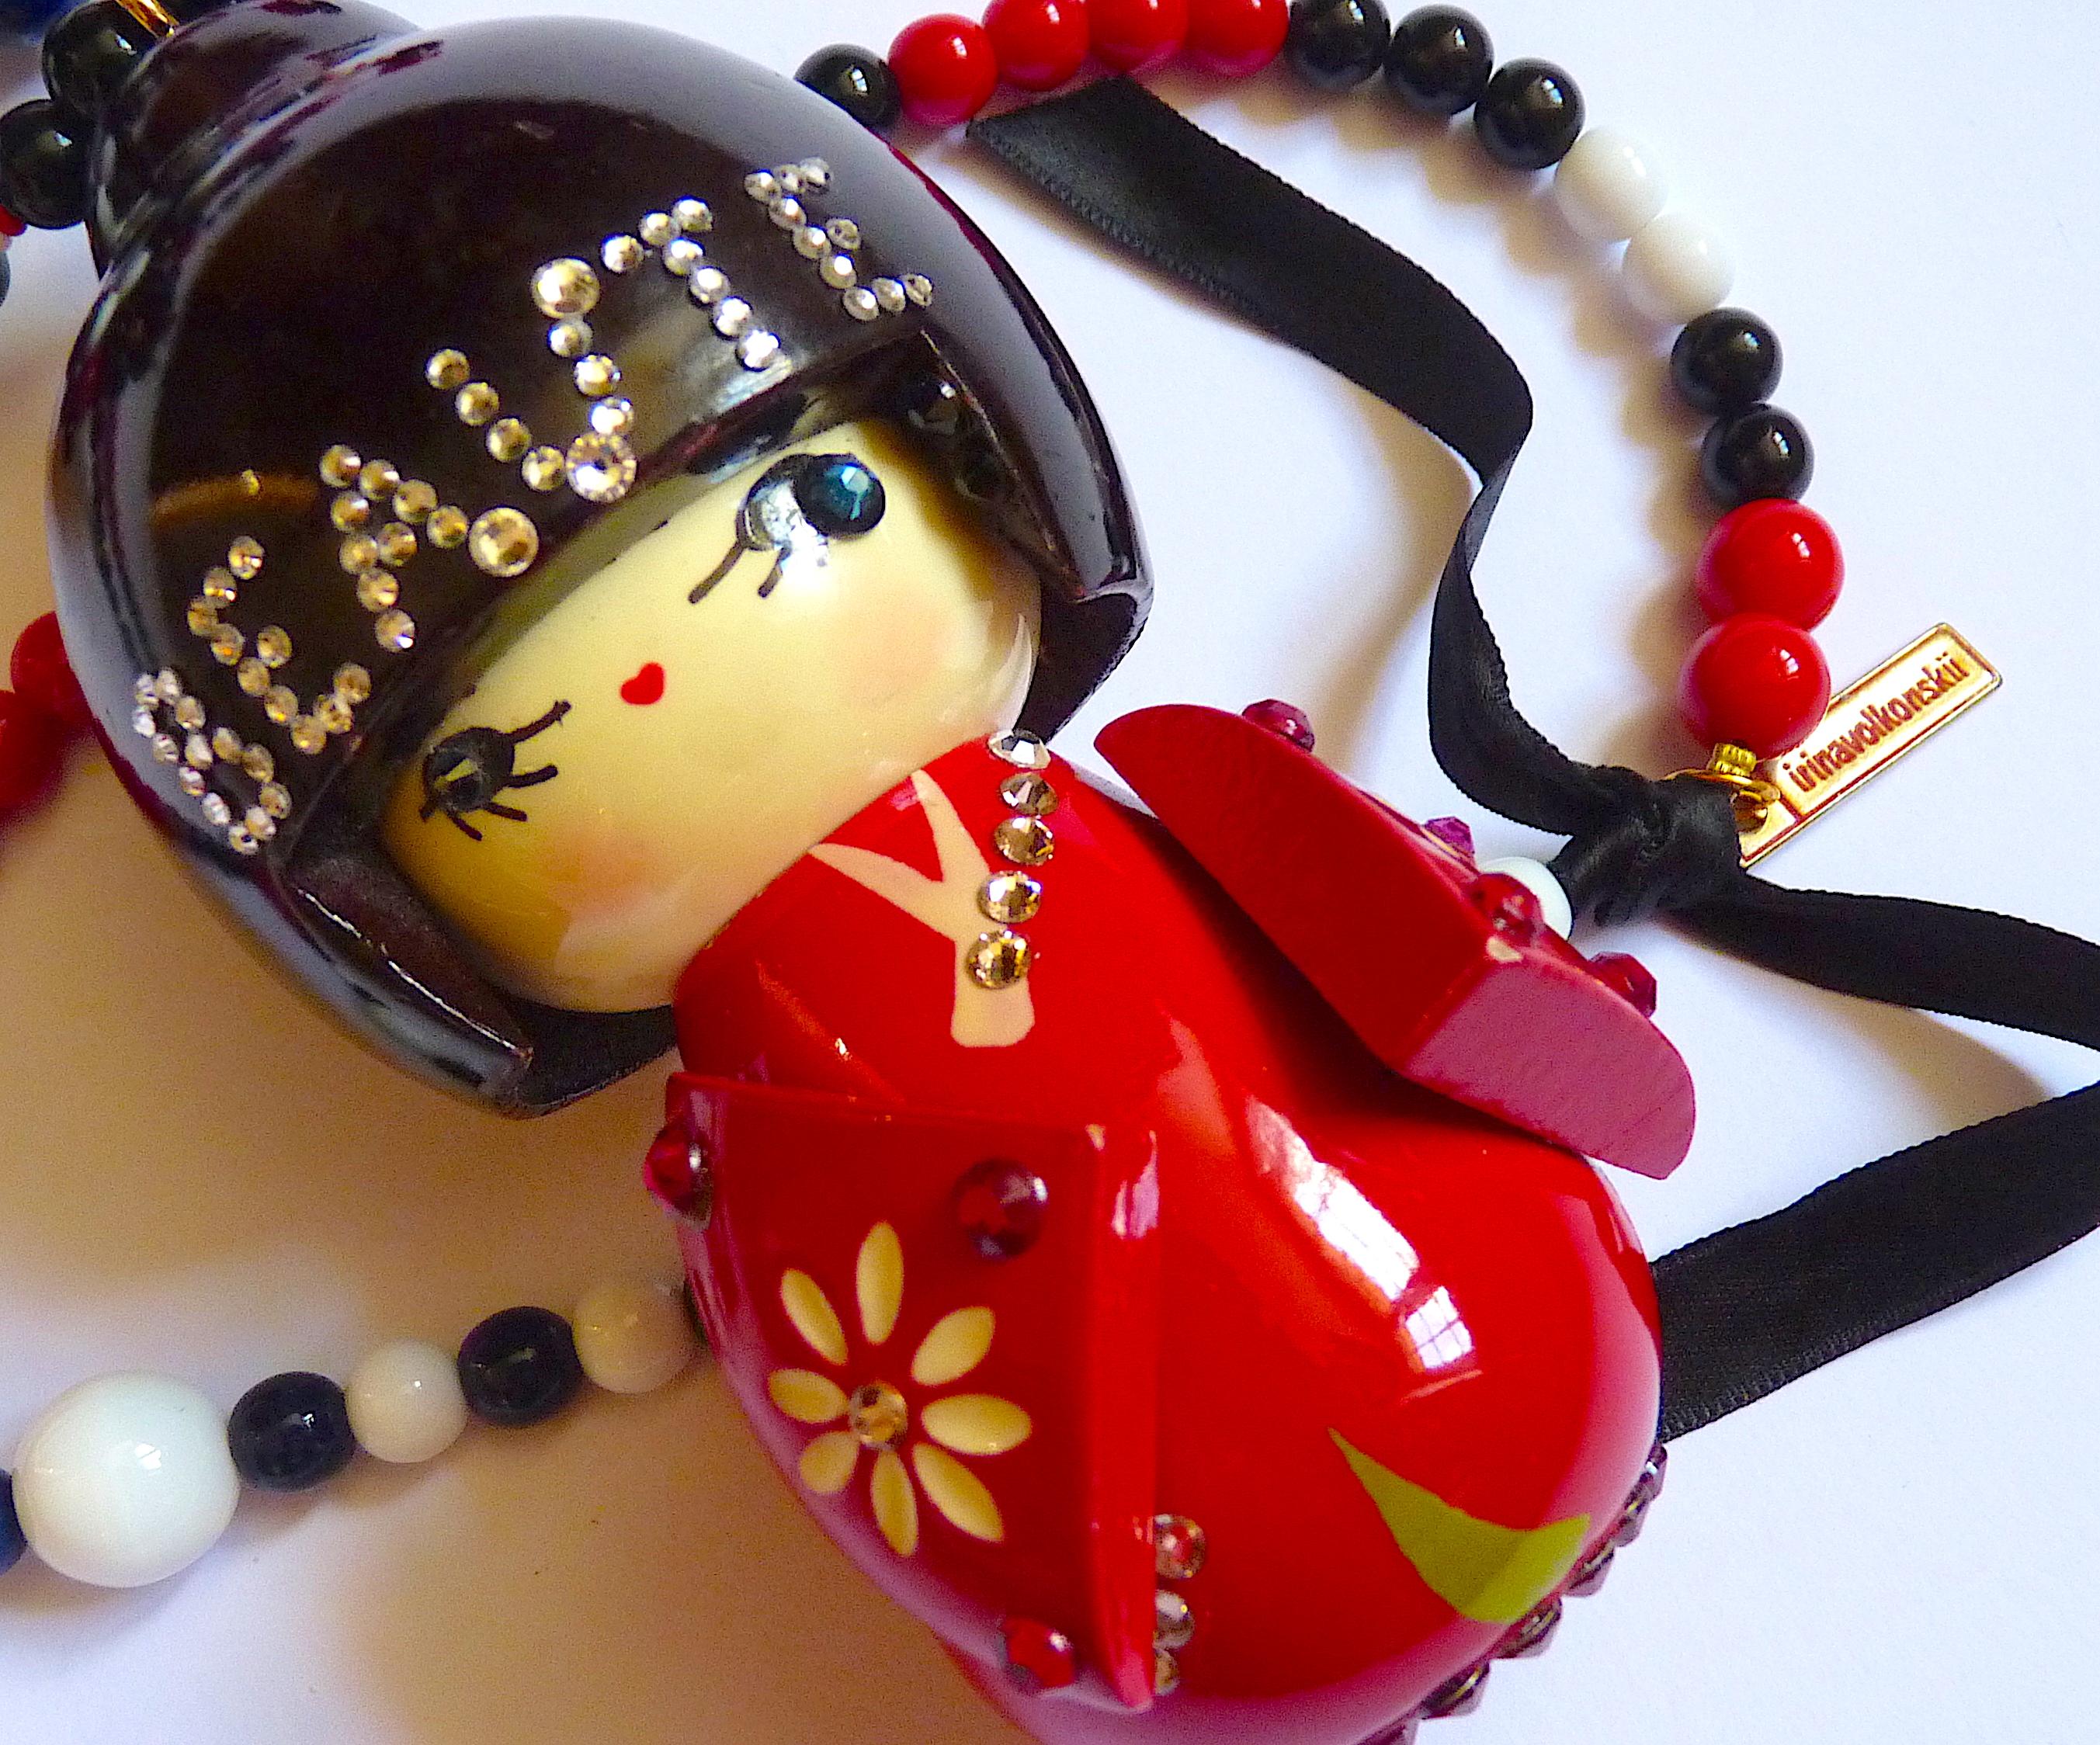 Ultra Rare Irina Volkonskii  for Paul Smith London, Very Long Pendant Necklace, made of Blue, White, Red, Black pearls with a Large Geisha Doll  Pendant adorned with rhinestones and the word BEAUTY .

IRINA VOLKONSKII is a russian born artist,